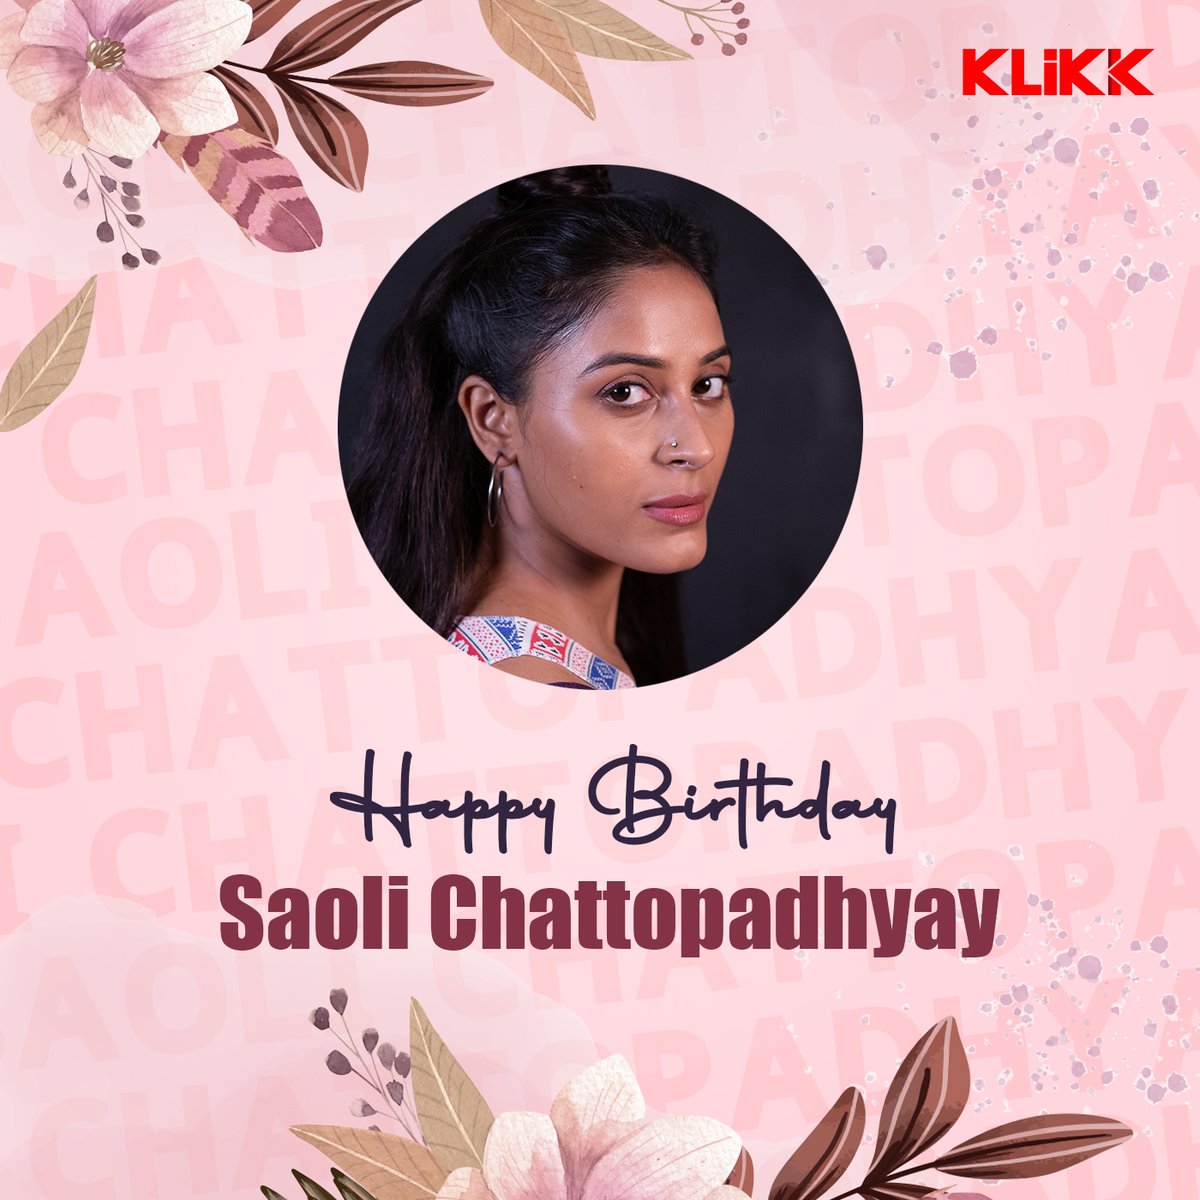 Wishing a delighted birthday to the phenomenal and talented actress, Saoli Chattopadhyay! 💗
#Klikk #SaoliChattopadhyay